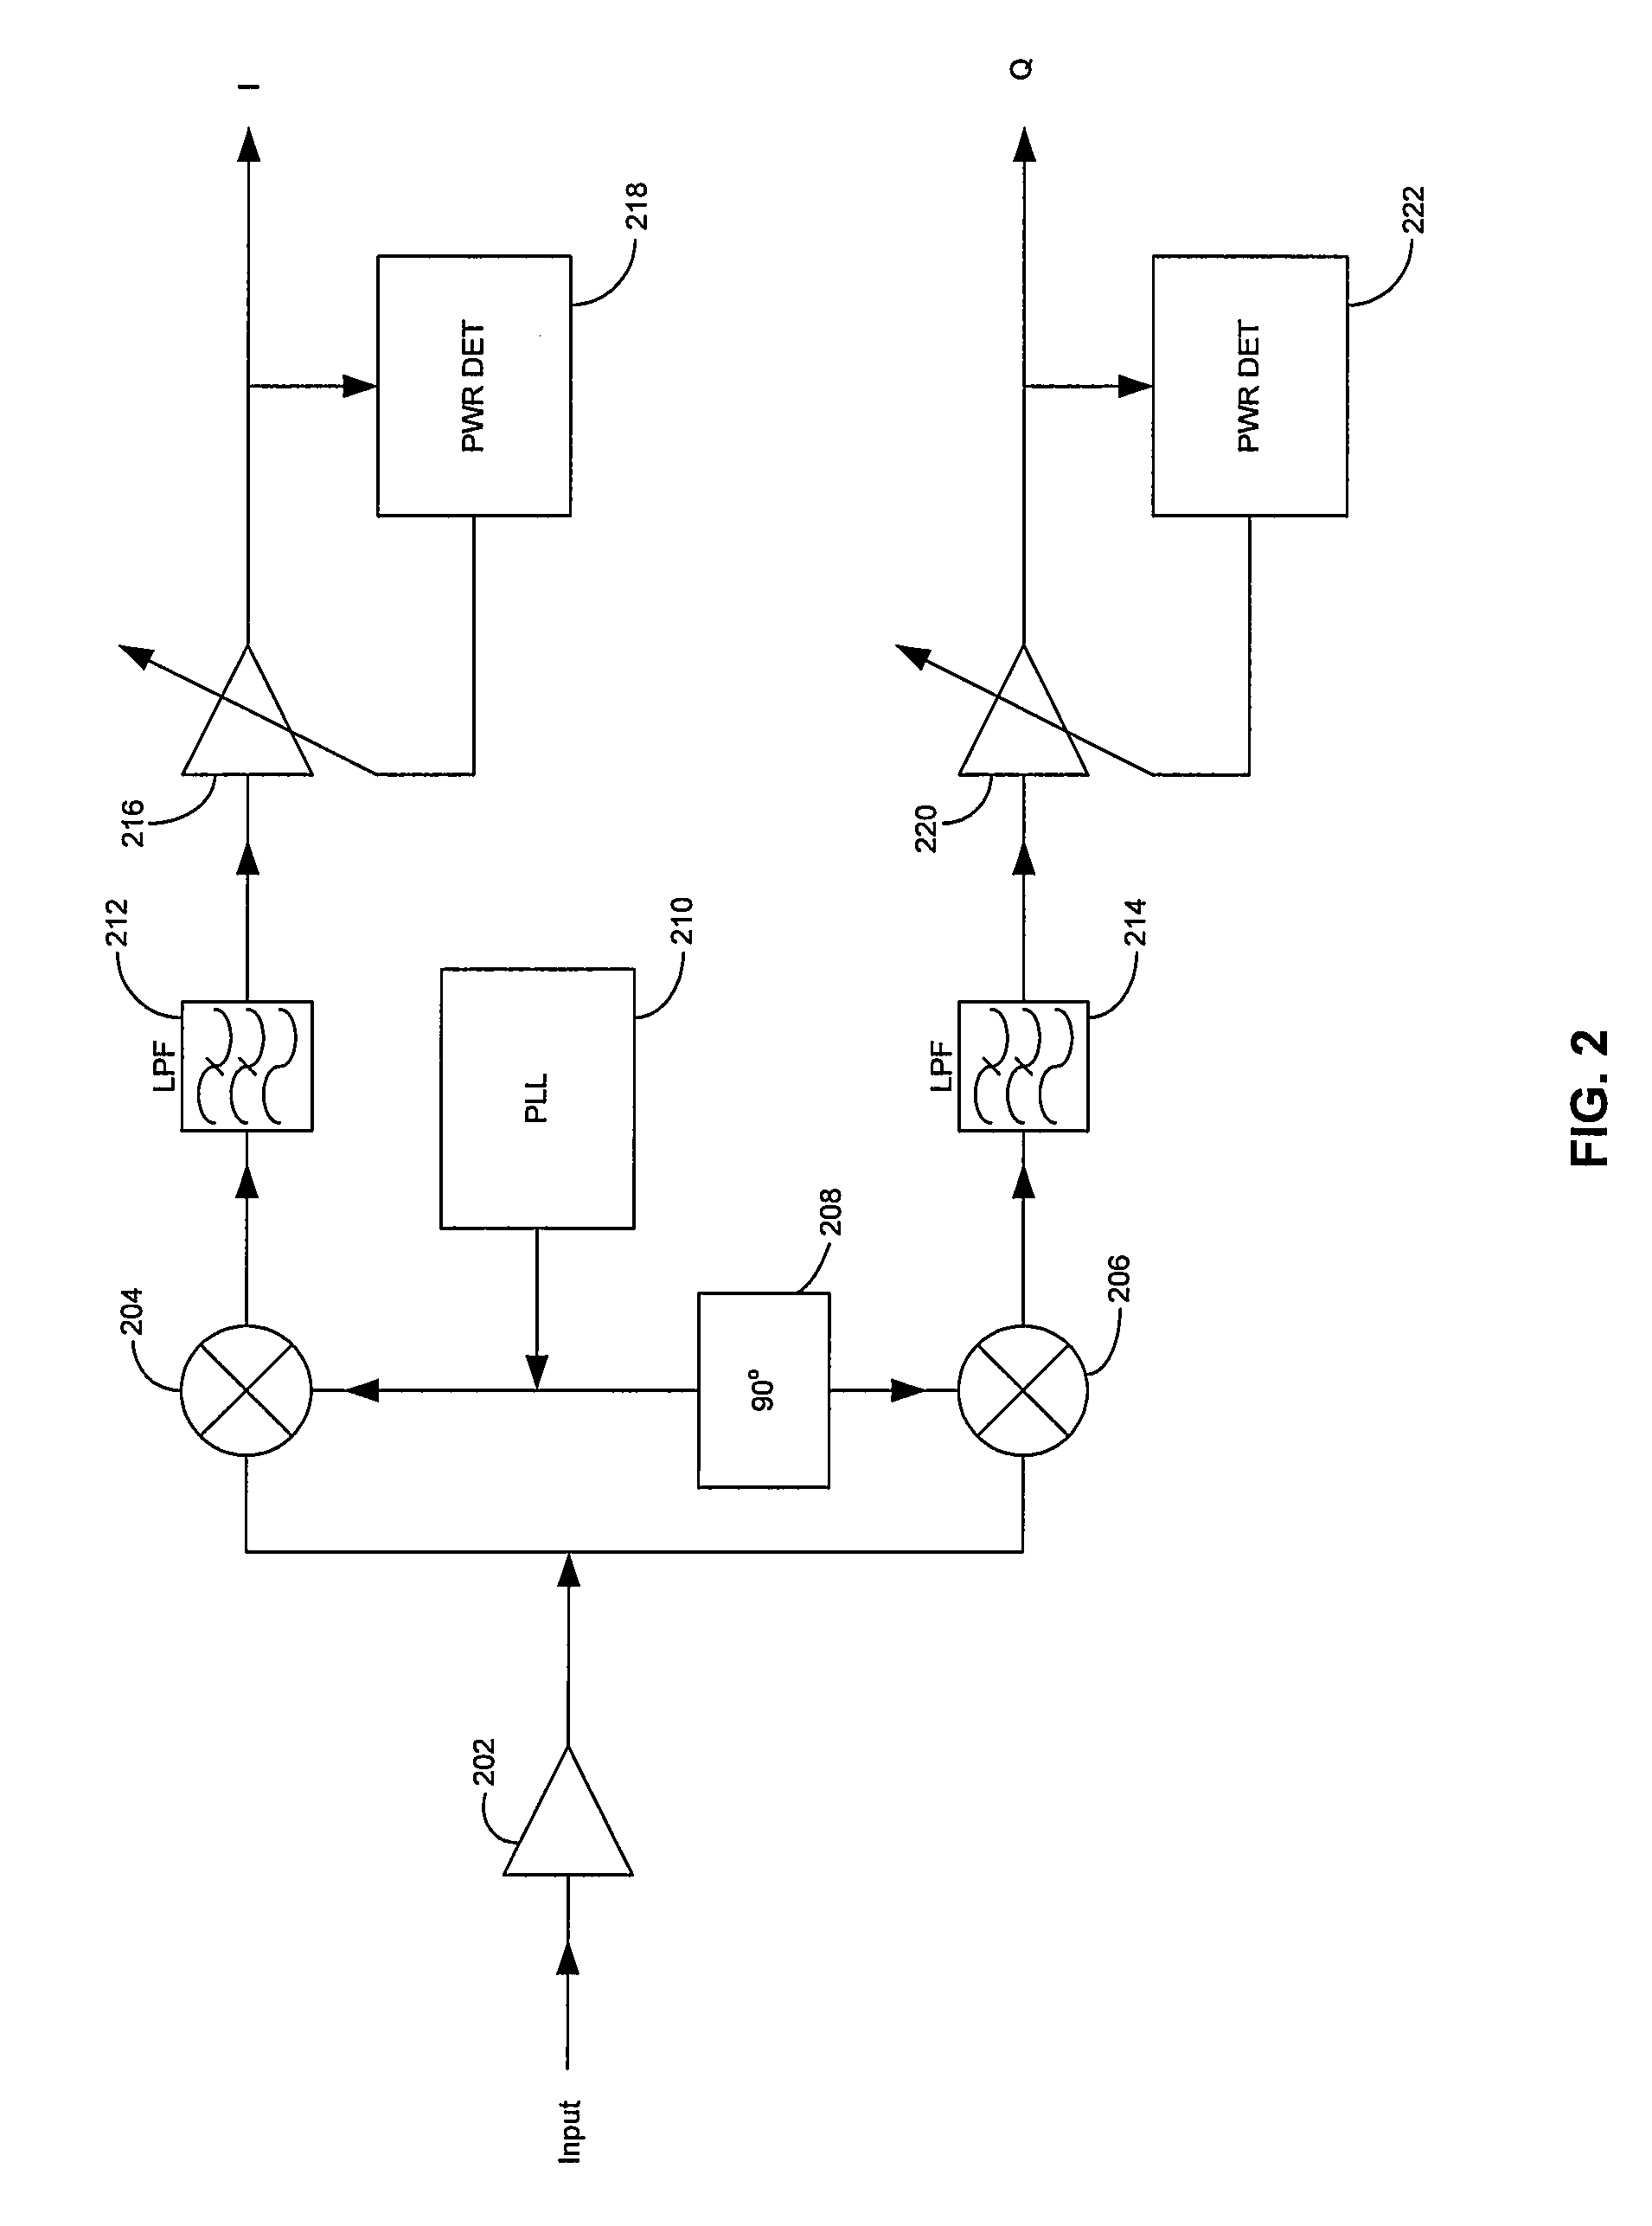 Method and System for RC-CR Quadrature Generation with Wideband Coverage and Process Compensation